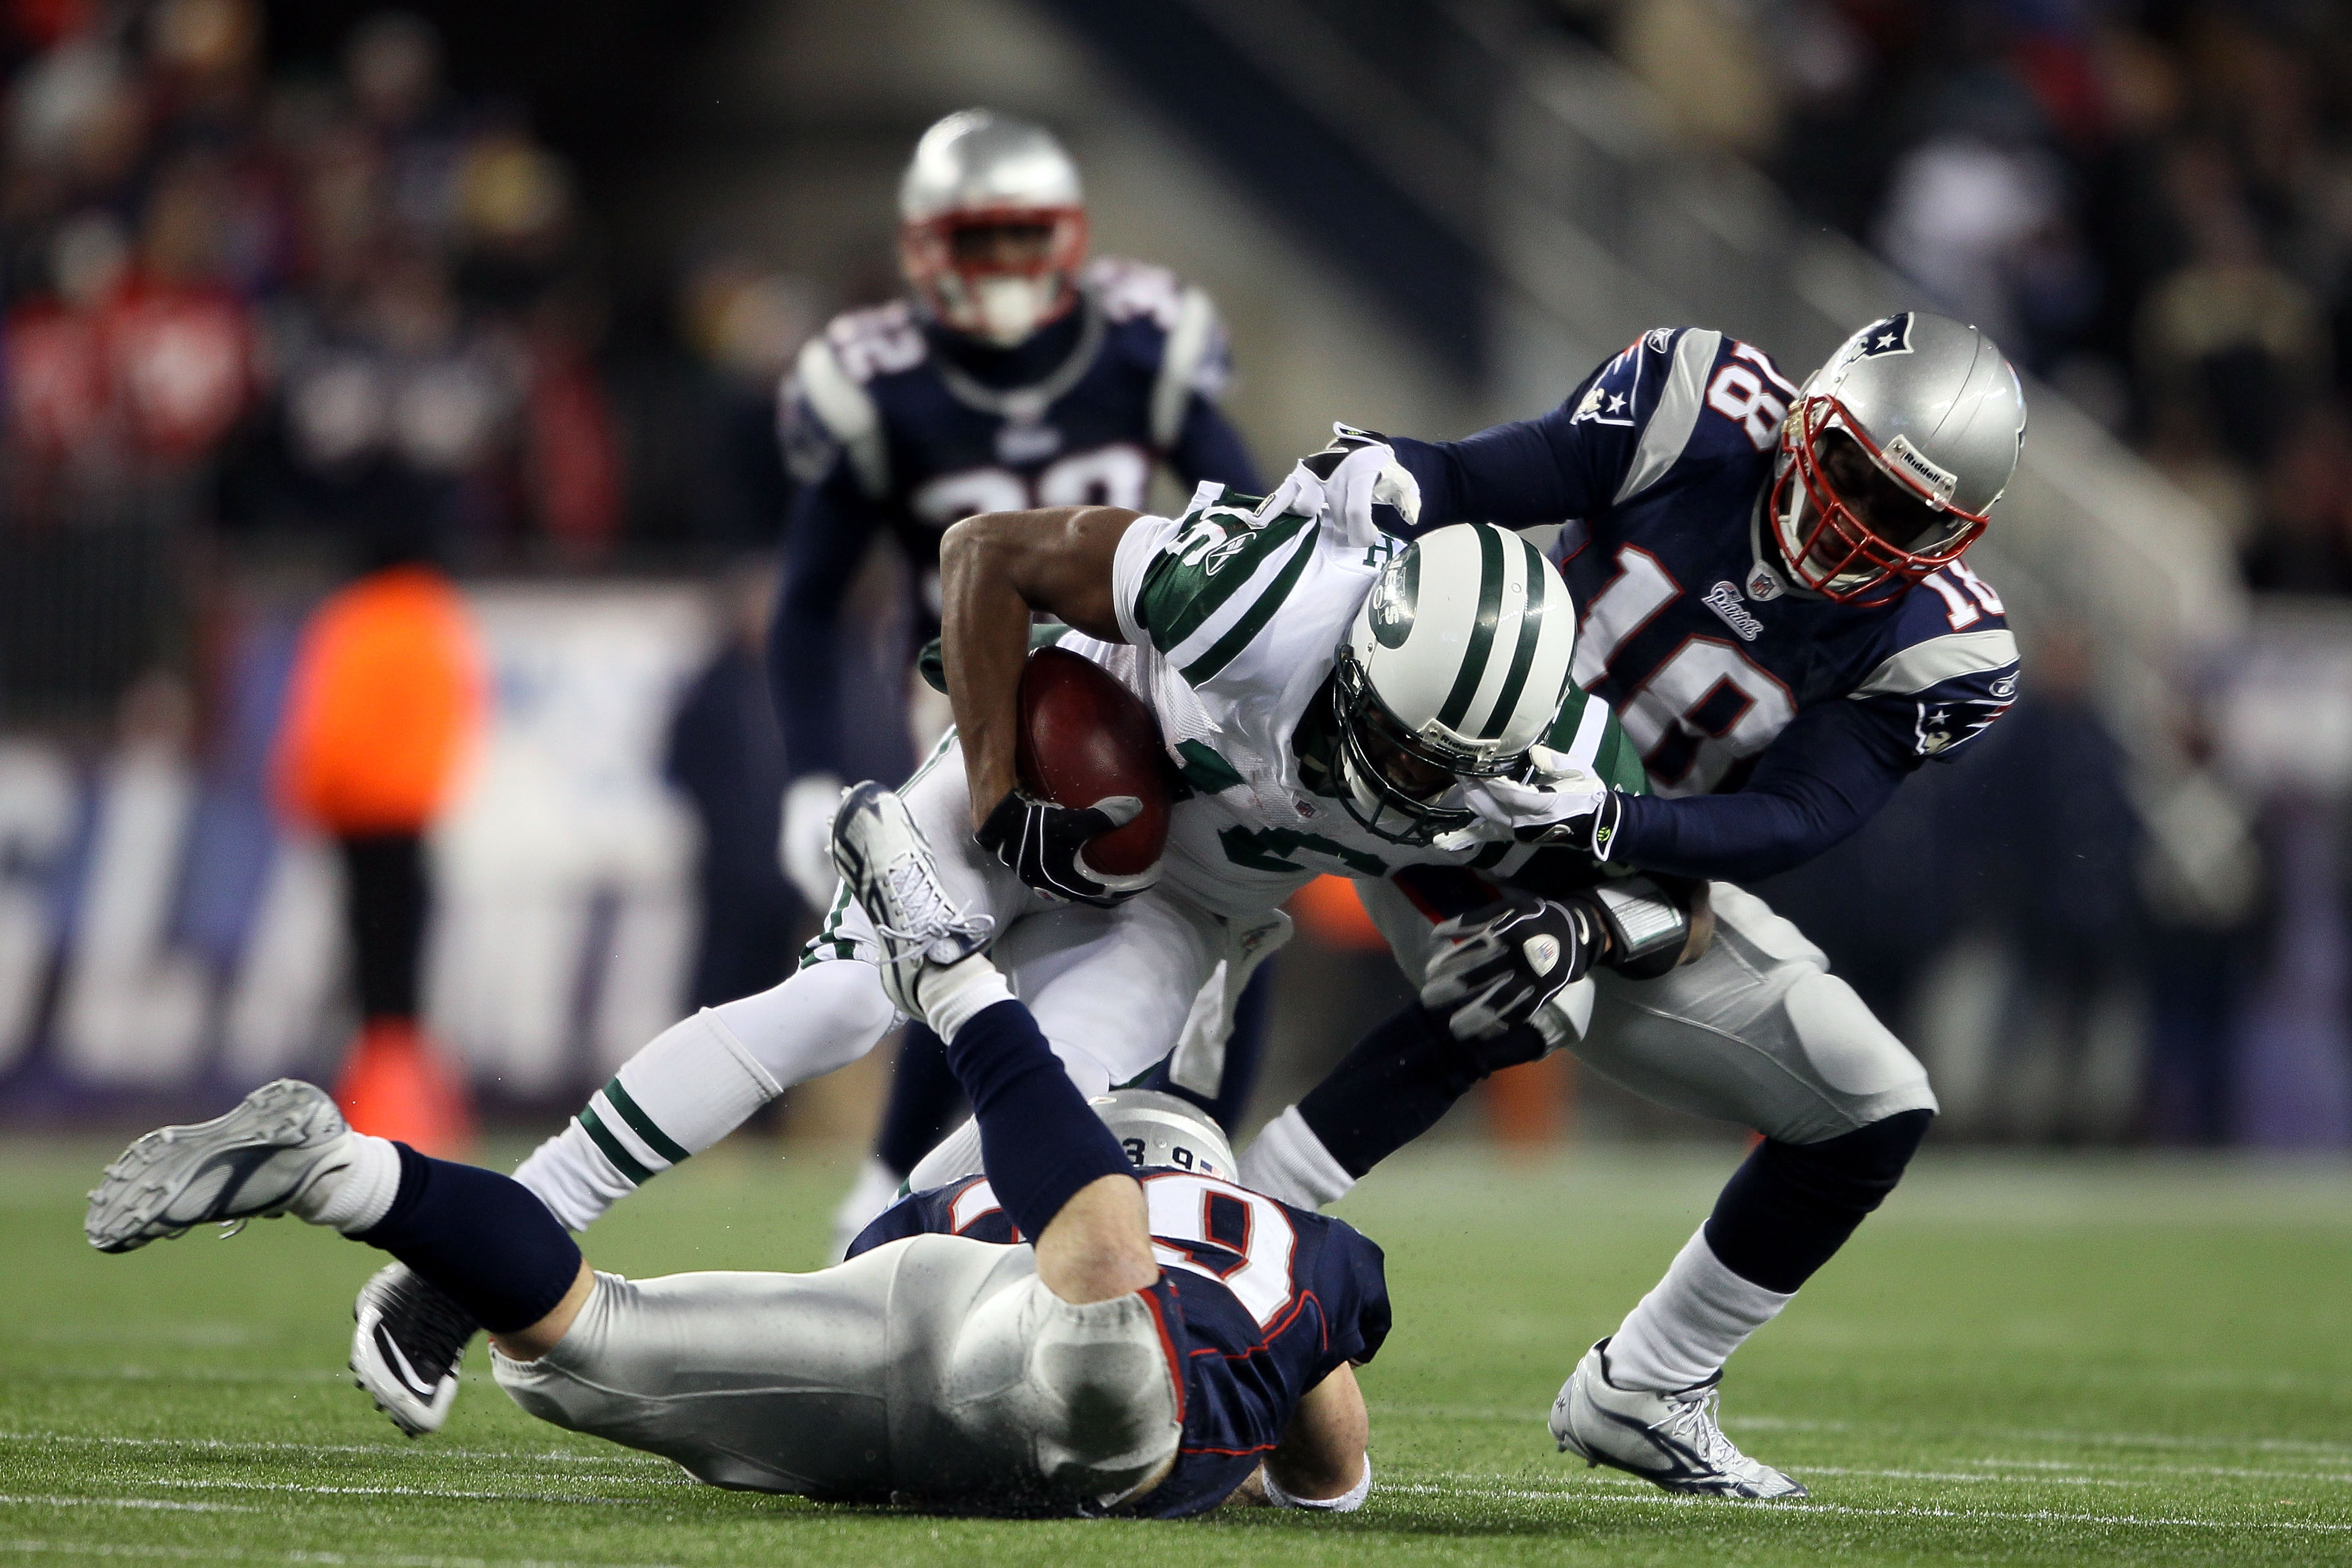 FOXBORO, MA - DECEMBER 06:  Brad Smith #16 of the New York Jets is tackled by Danny Woodhead #39 and Matthew Slater #18 of the New England Patriots at Gillette Stadium on December 6, 2010 in Foxboro, Massachusetts.  (Photo by Elsa/Getty Images)